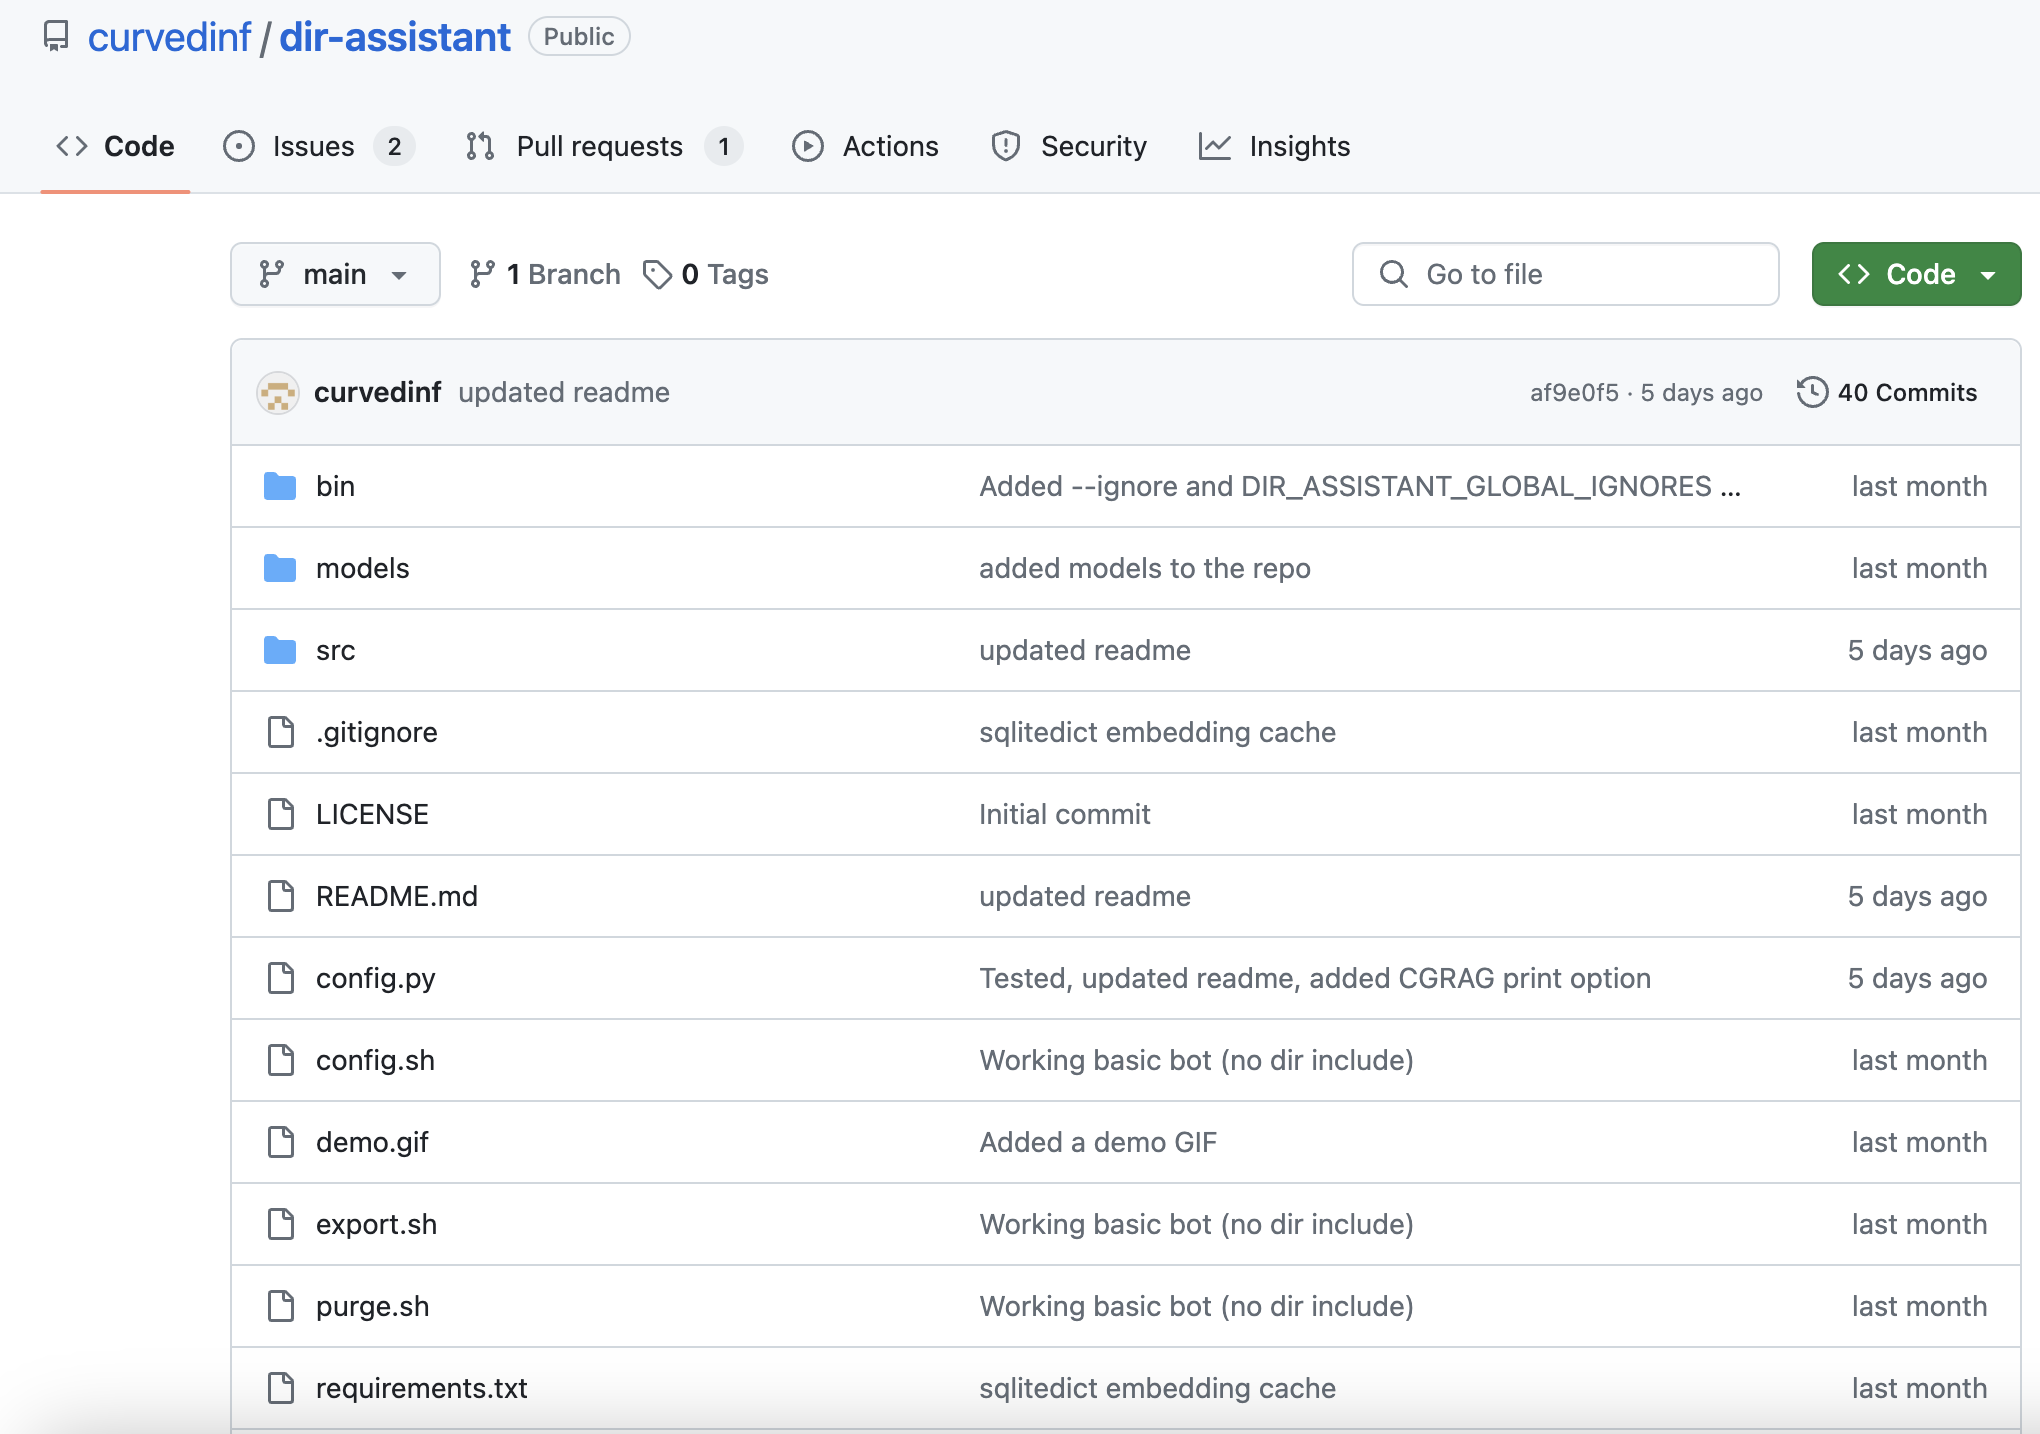  Dir-Assistant: Simplifying File Management with Local and API Language Models